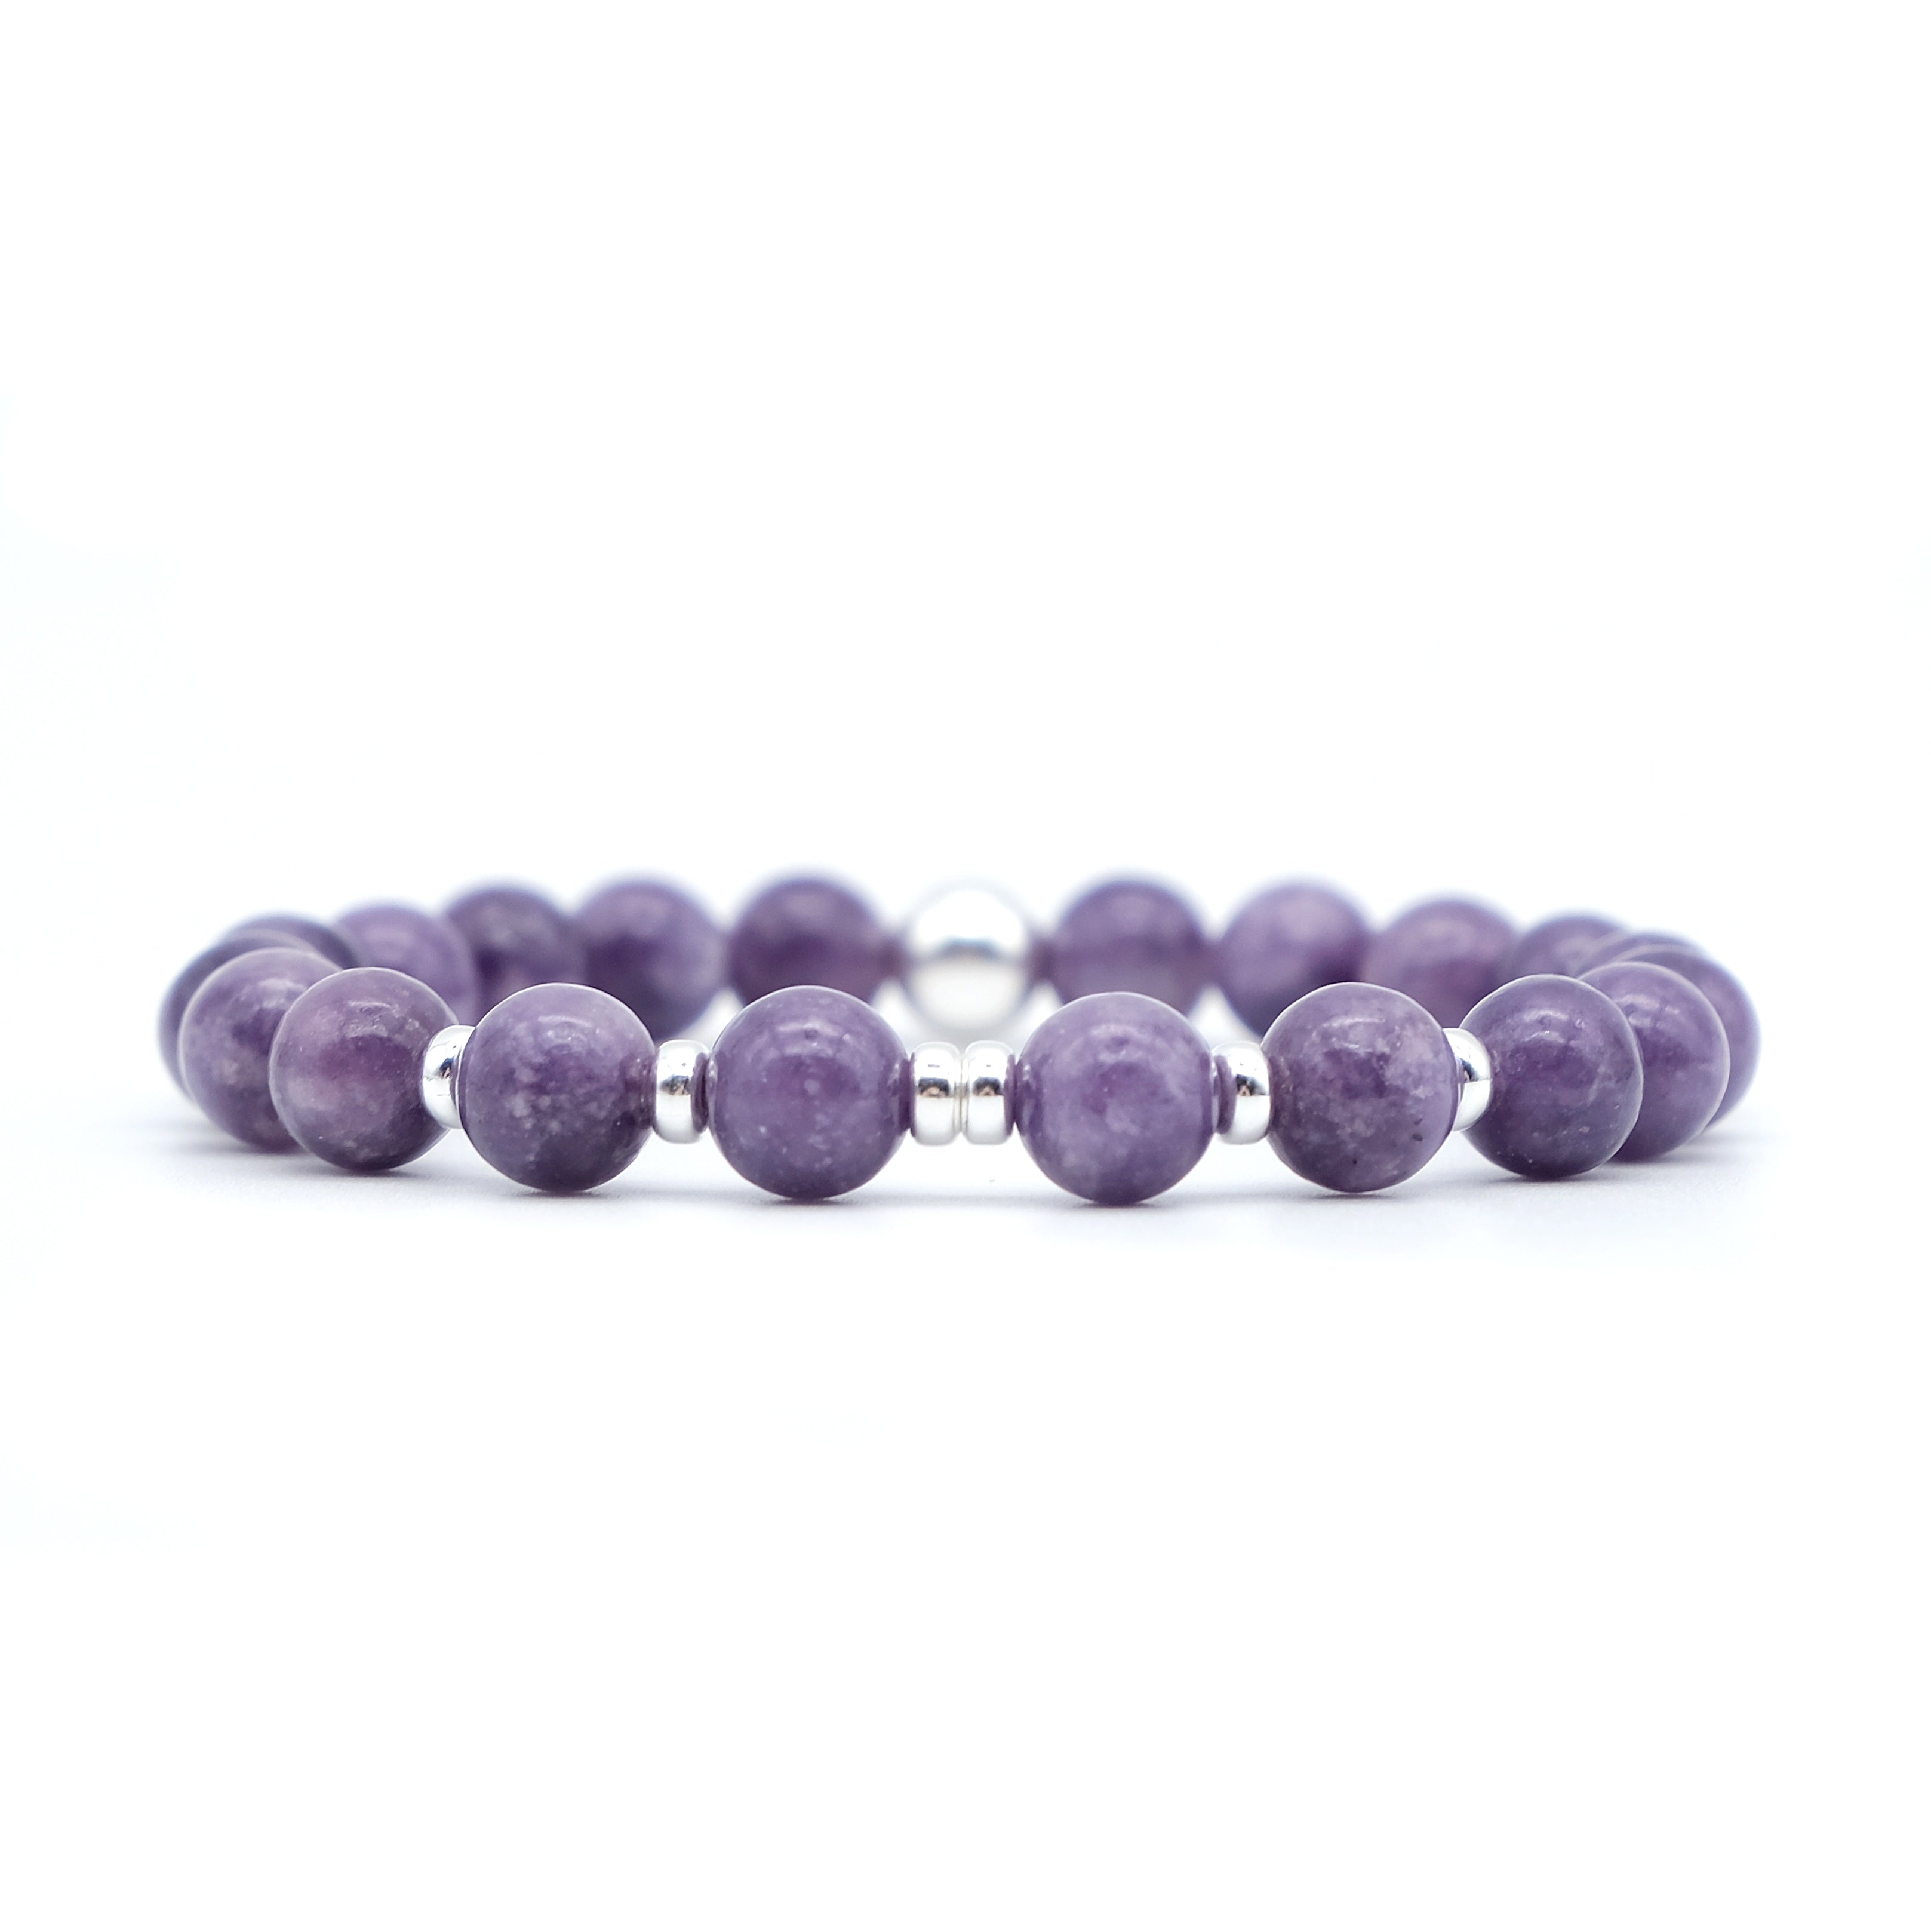 A lepidolite gemstone bracelet with silver accessories